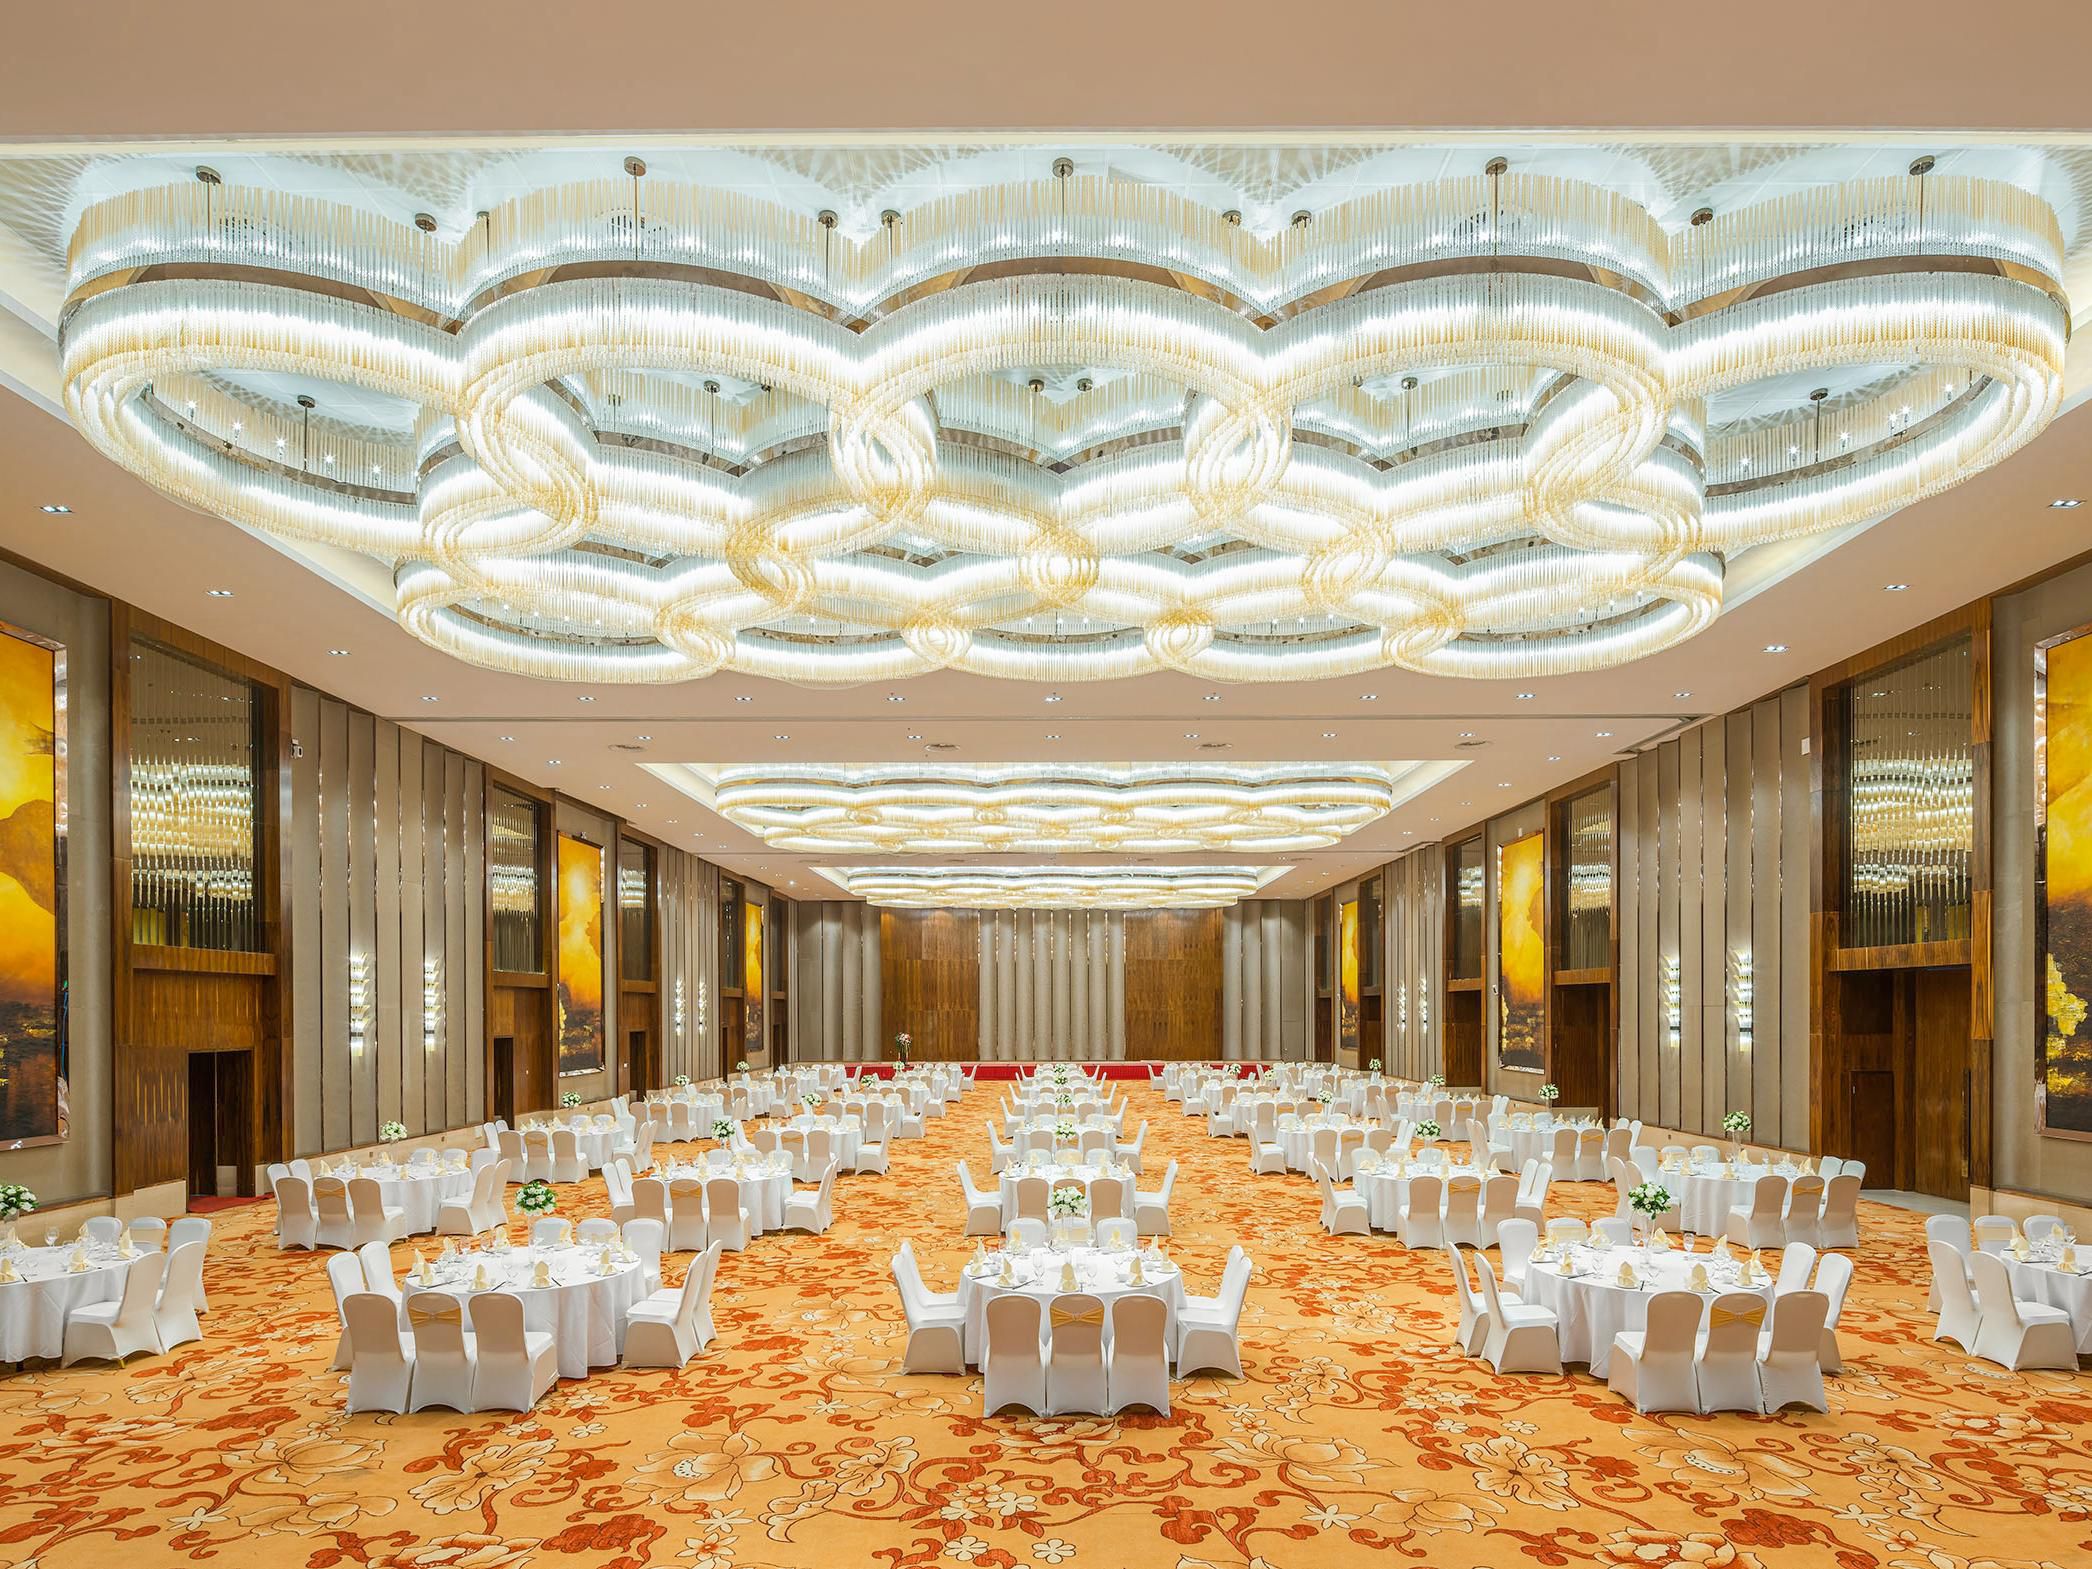 Just because you’re on a budget doesn’t mean you can’t have the best! Crowne Plaza Dalian Sports Center offers comprehensive packages starting from RMB 2999/table.